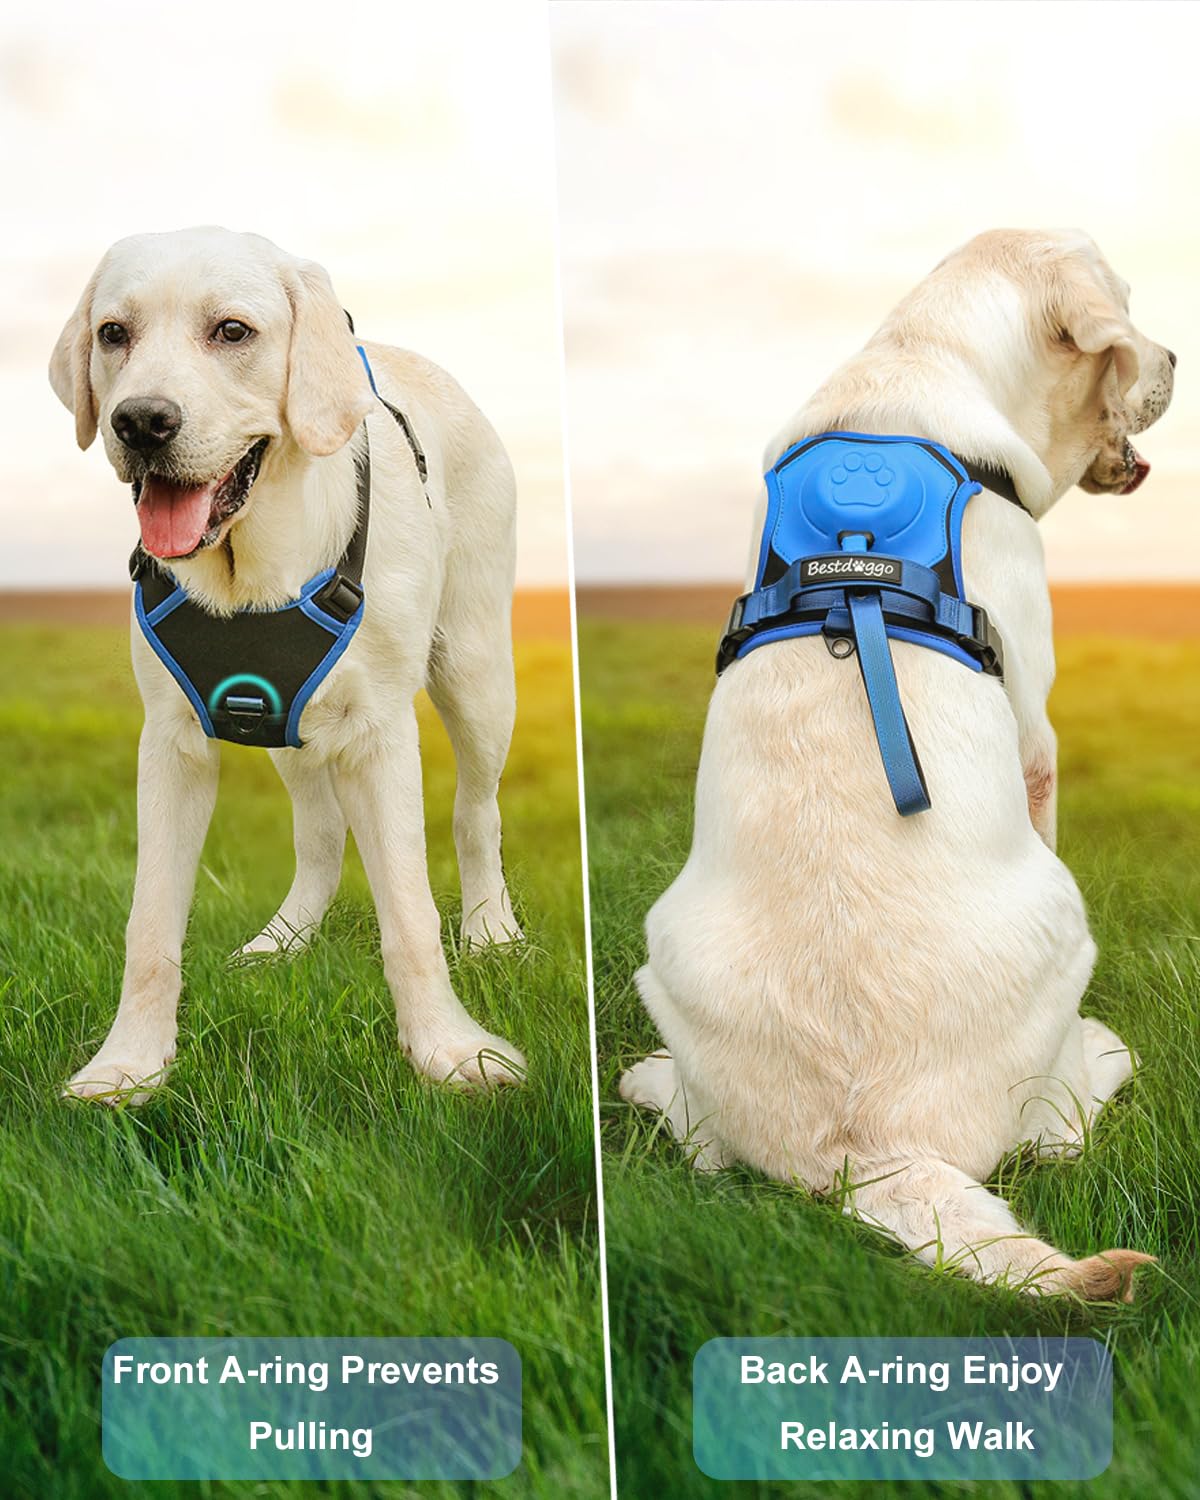 🔥2023 HOT SALE - Dog Harness and Retractable Leash Set All-in-One